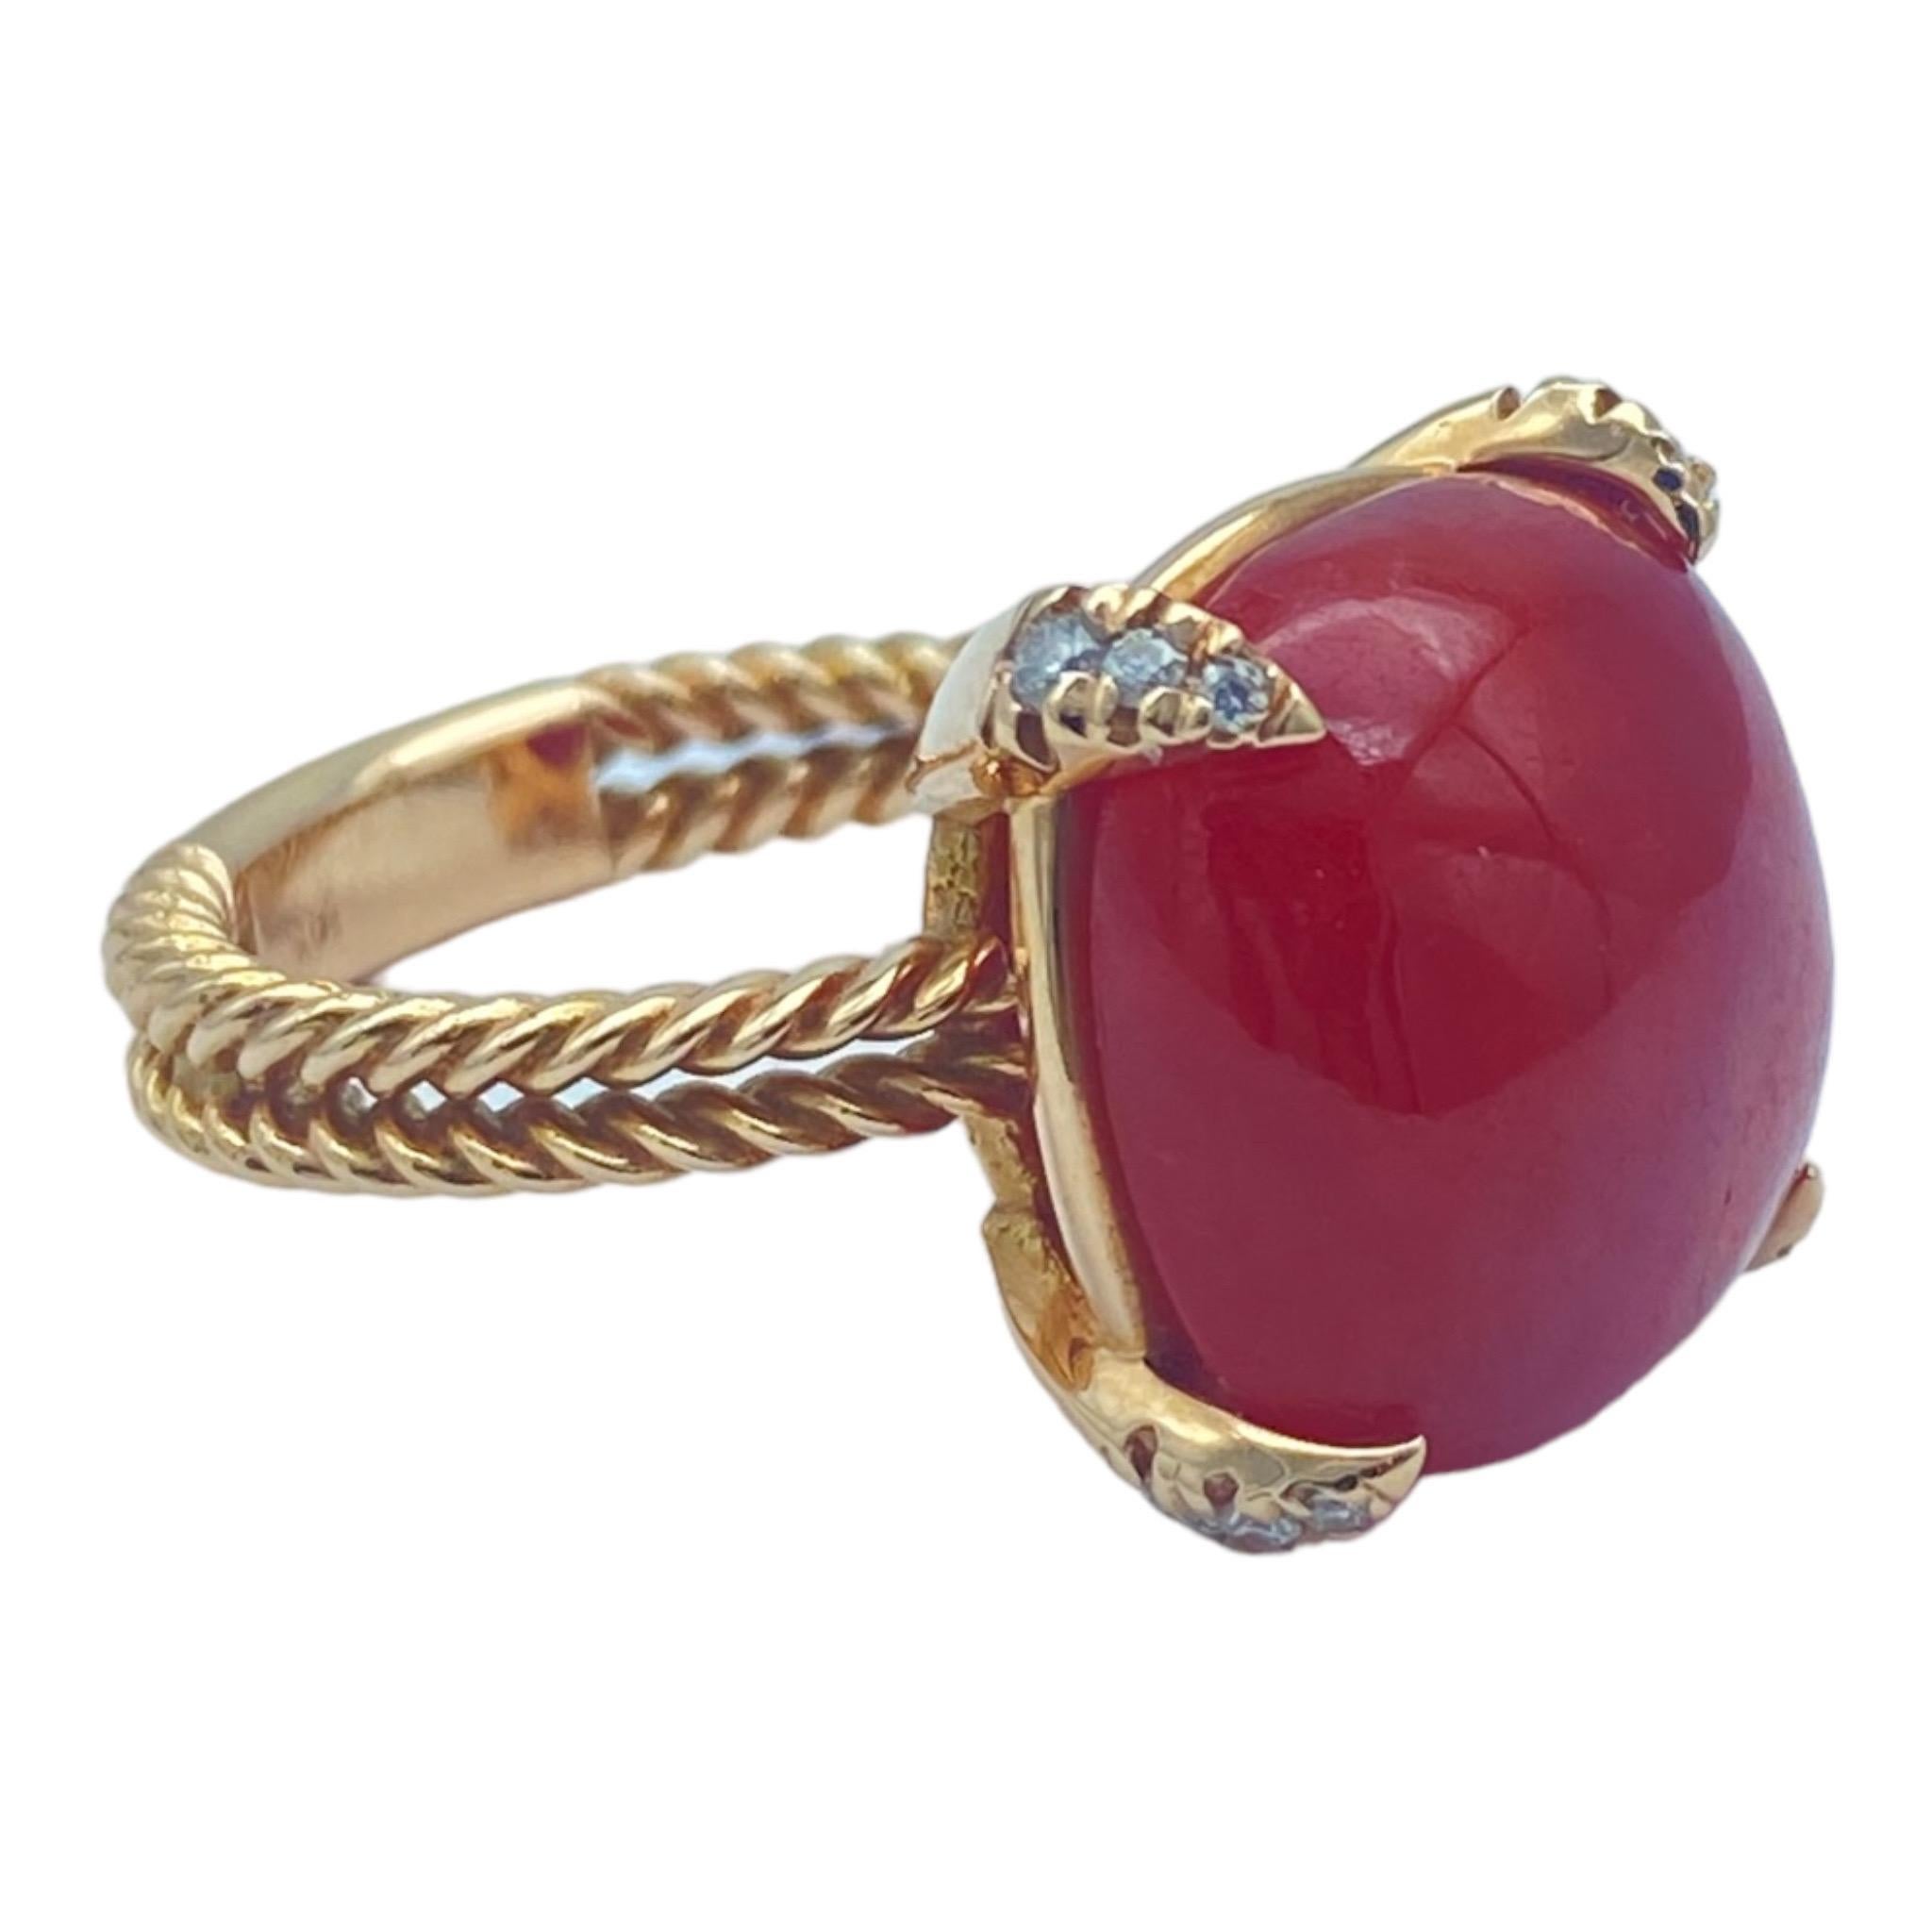 The Red Coral sugarloaf and diamond ring is set in a 14-karat pink or rose gold ring. The ring is a rope-textured style with diamond prongs holding the center stone. The Coral is a sugarloaf cushion cut measuring 14.10 mm in diameter. The diamonds